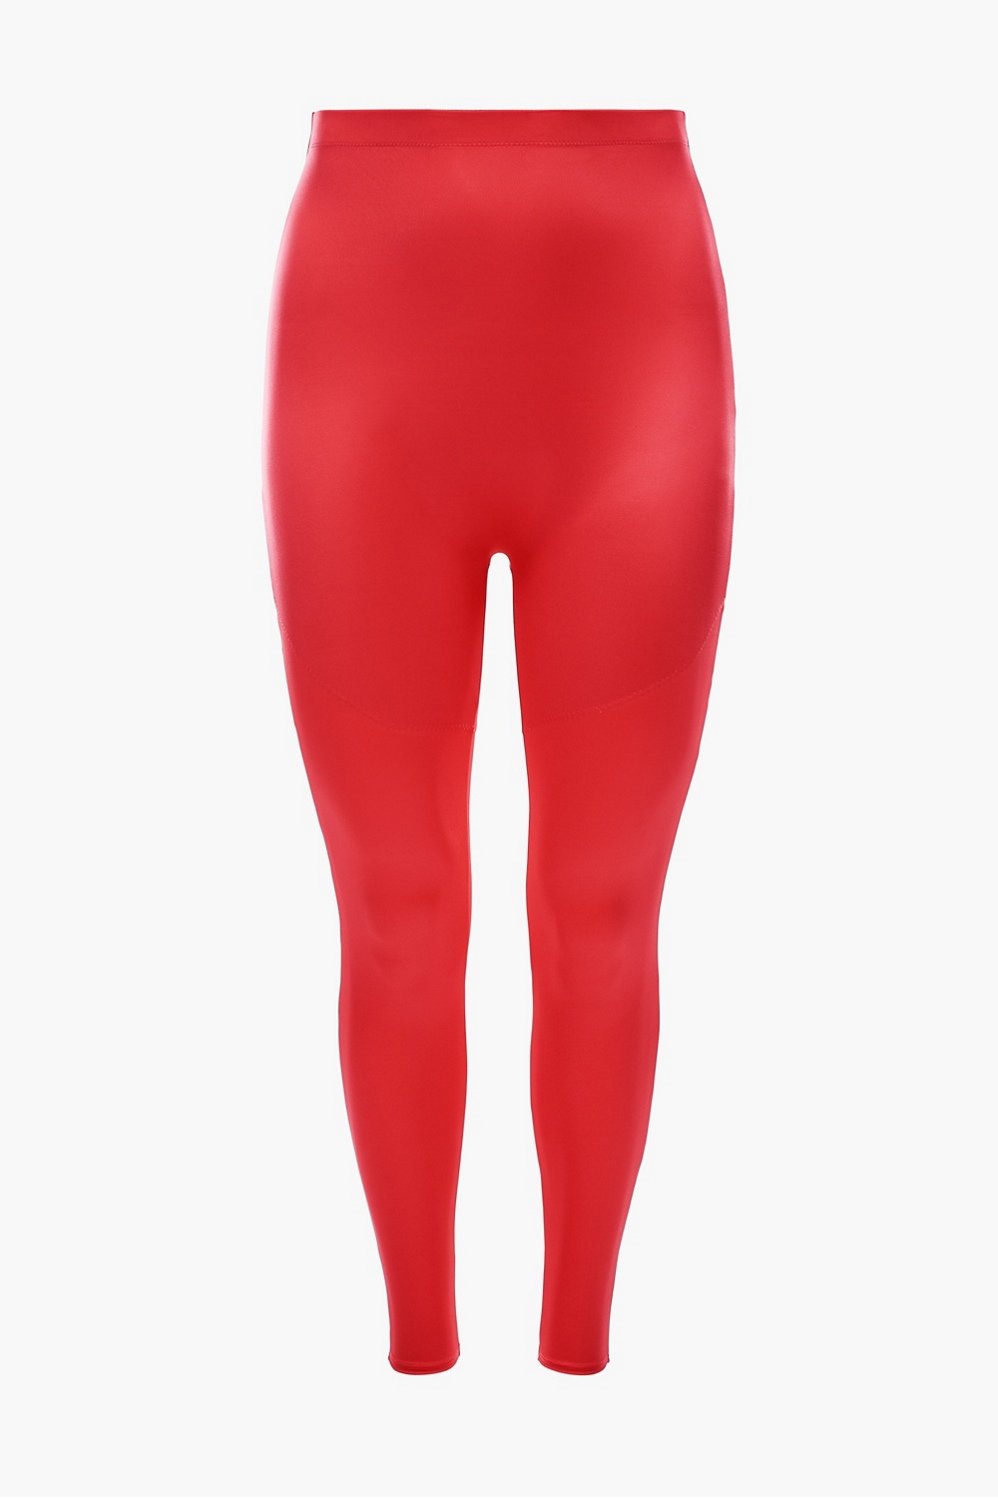 Yelete Leggings Red - $12 (65% Off Retail) - From Hailey